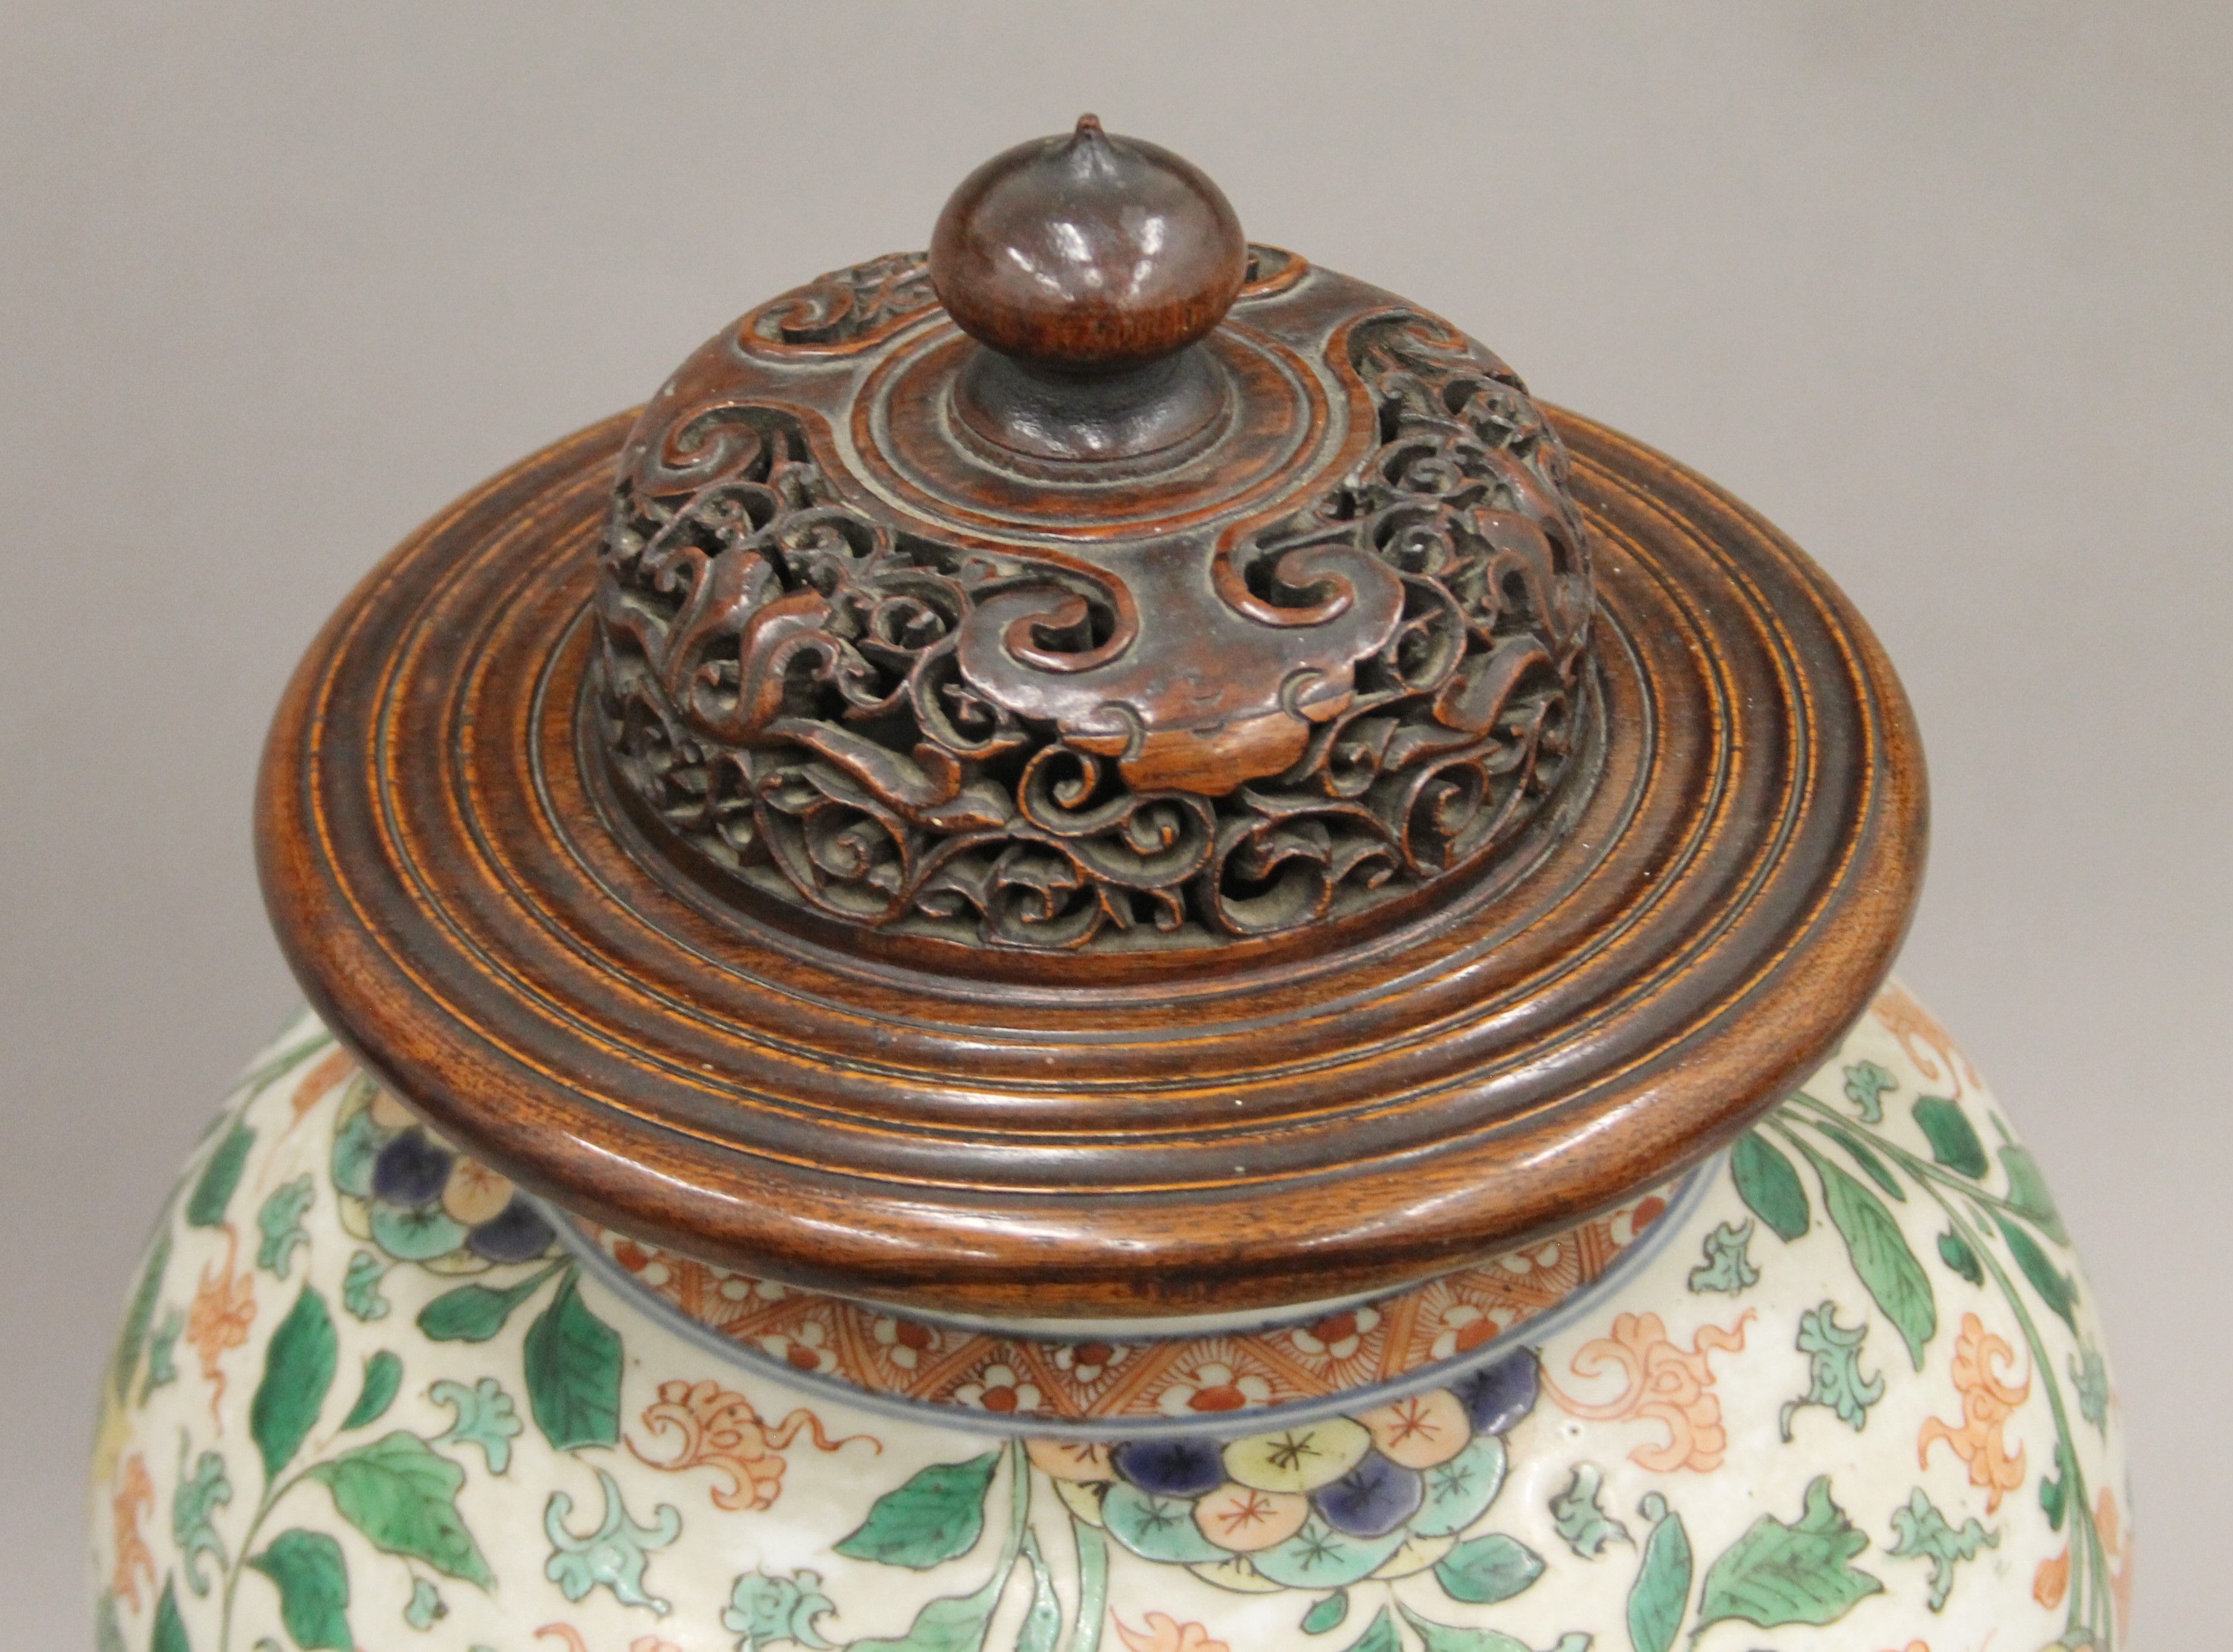 A 18th/19th century Chinese porcelain vase with pierced wooden lid and carved wooden stand. - Image 3 of 8